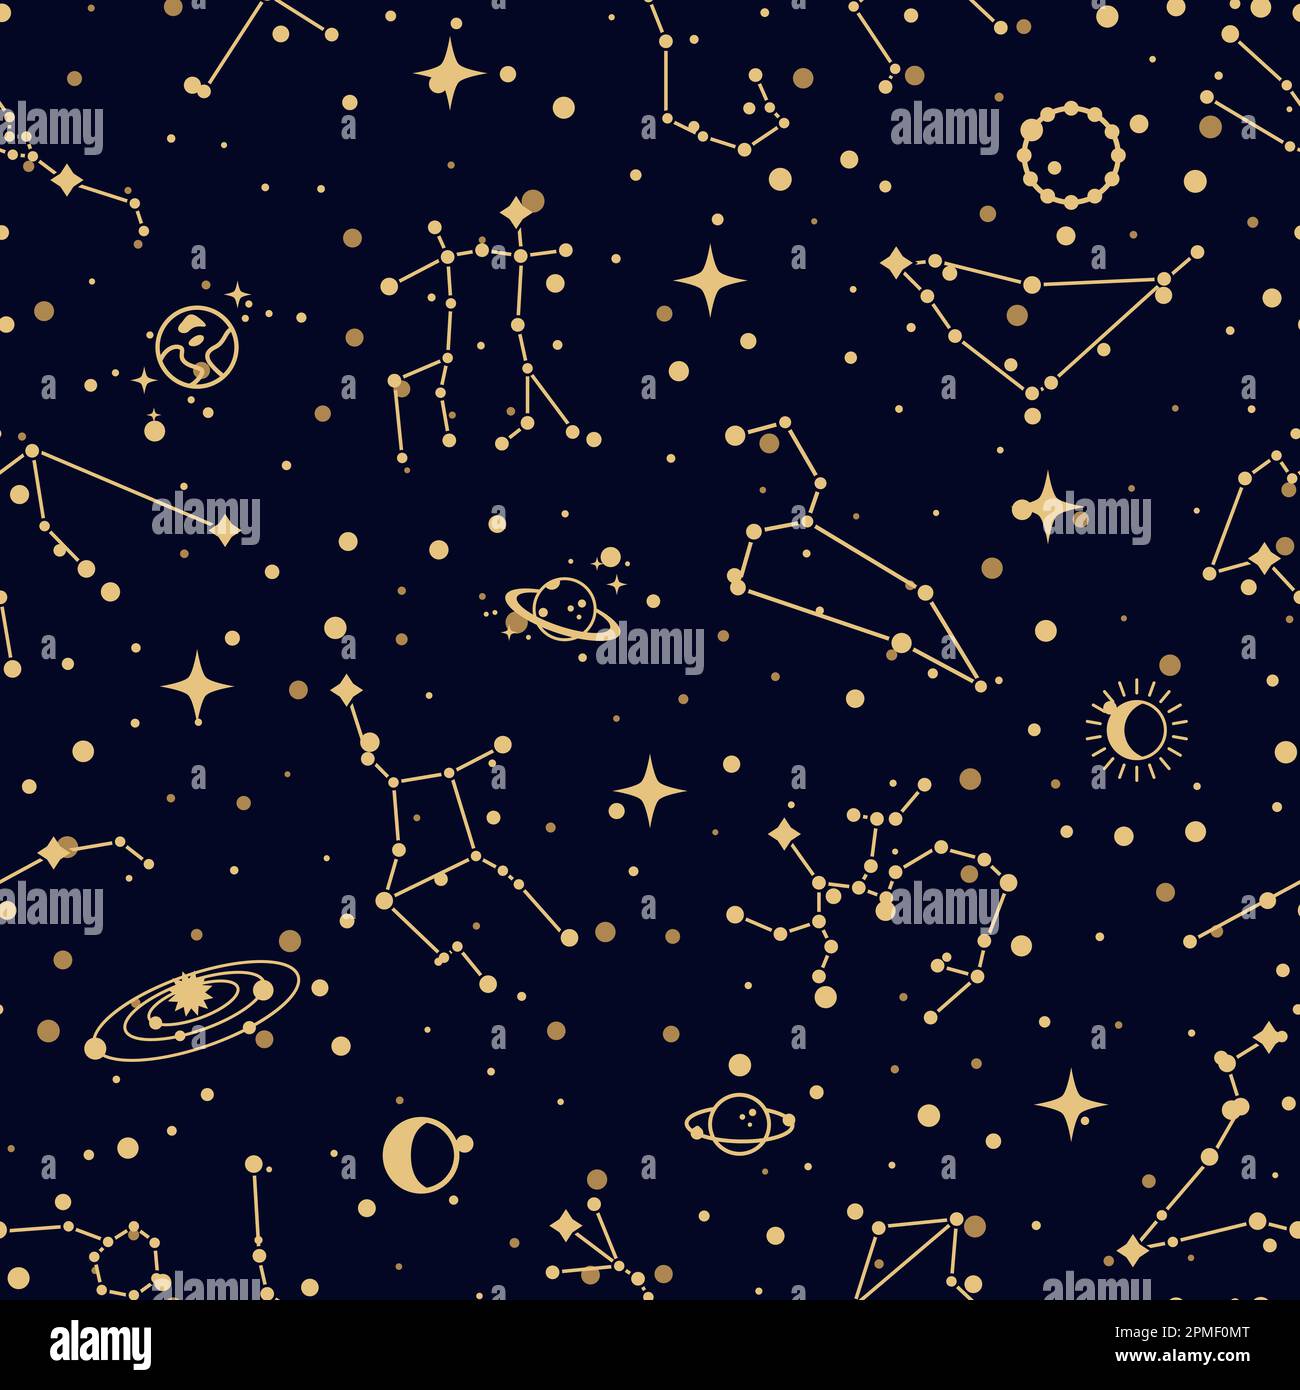 Constellation pattern, vector seamless background with zodiac star clusters, planets and satellites in black sky. Groups of stars in section of celest Stock Vector